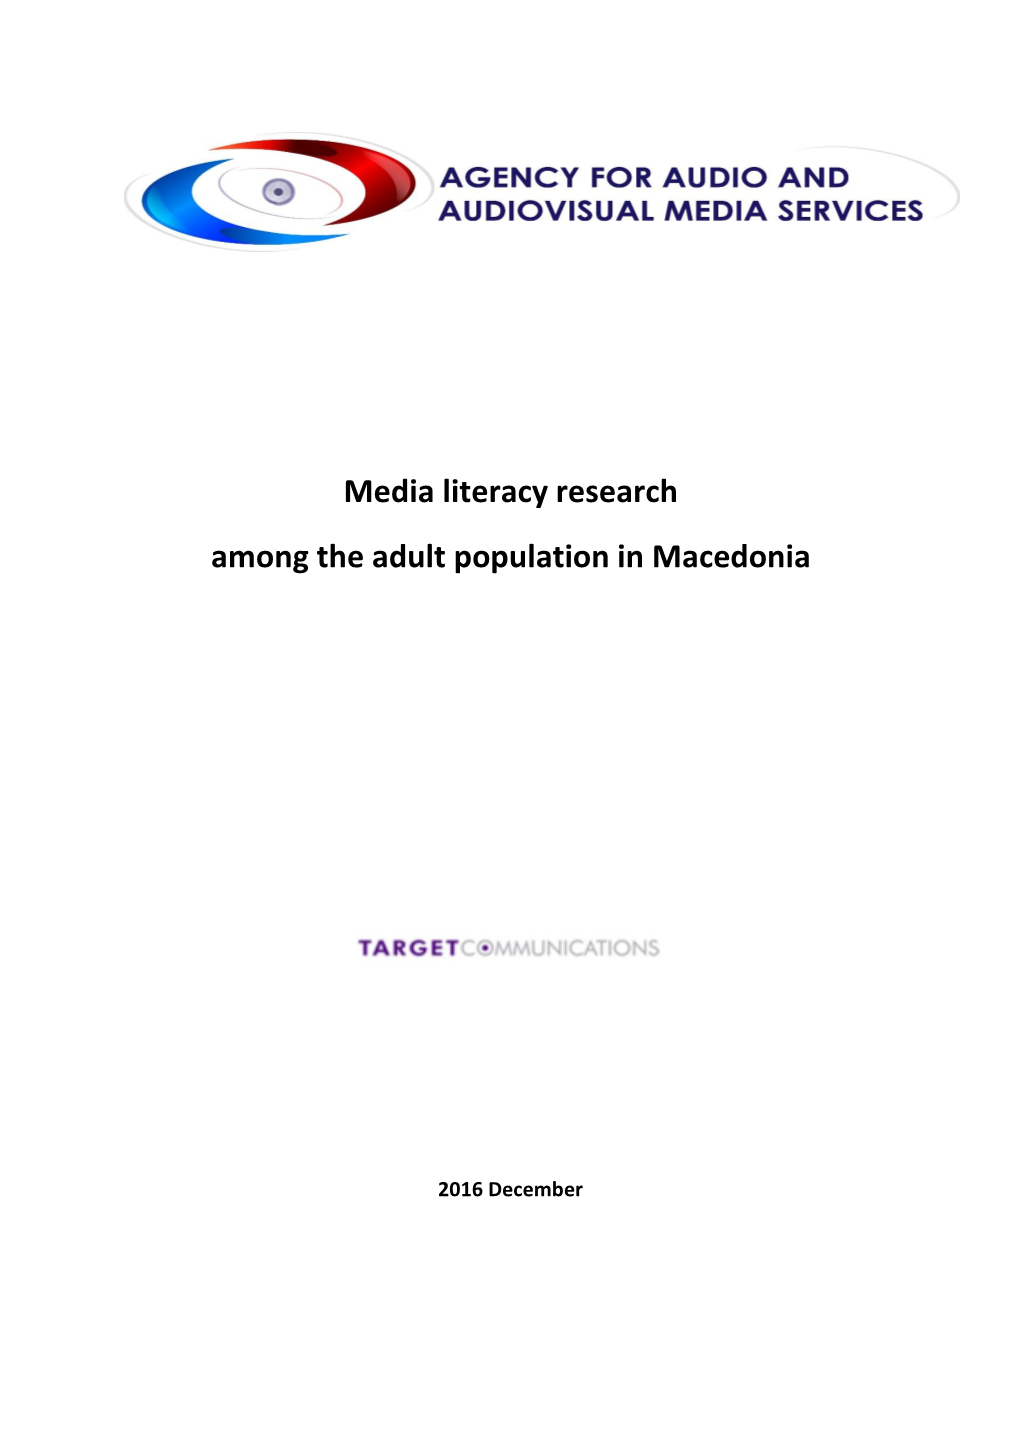 Media Literacy Research Among the Adult Population in Macedonia